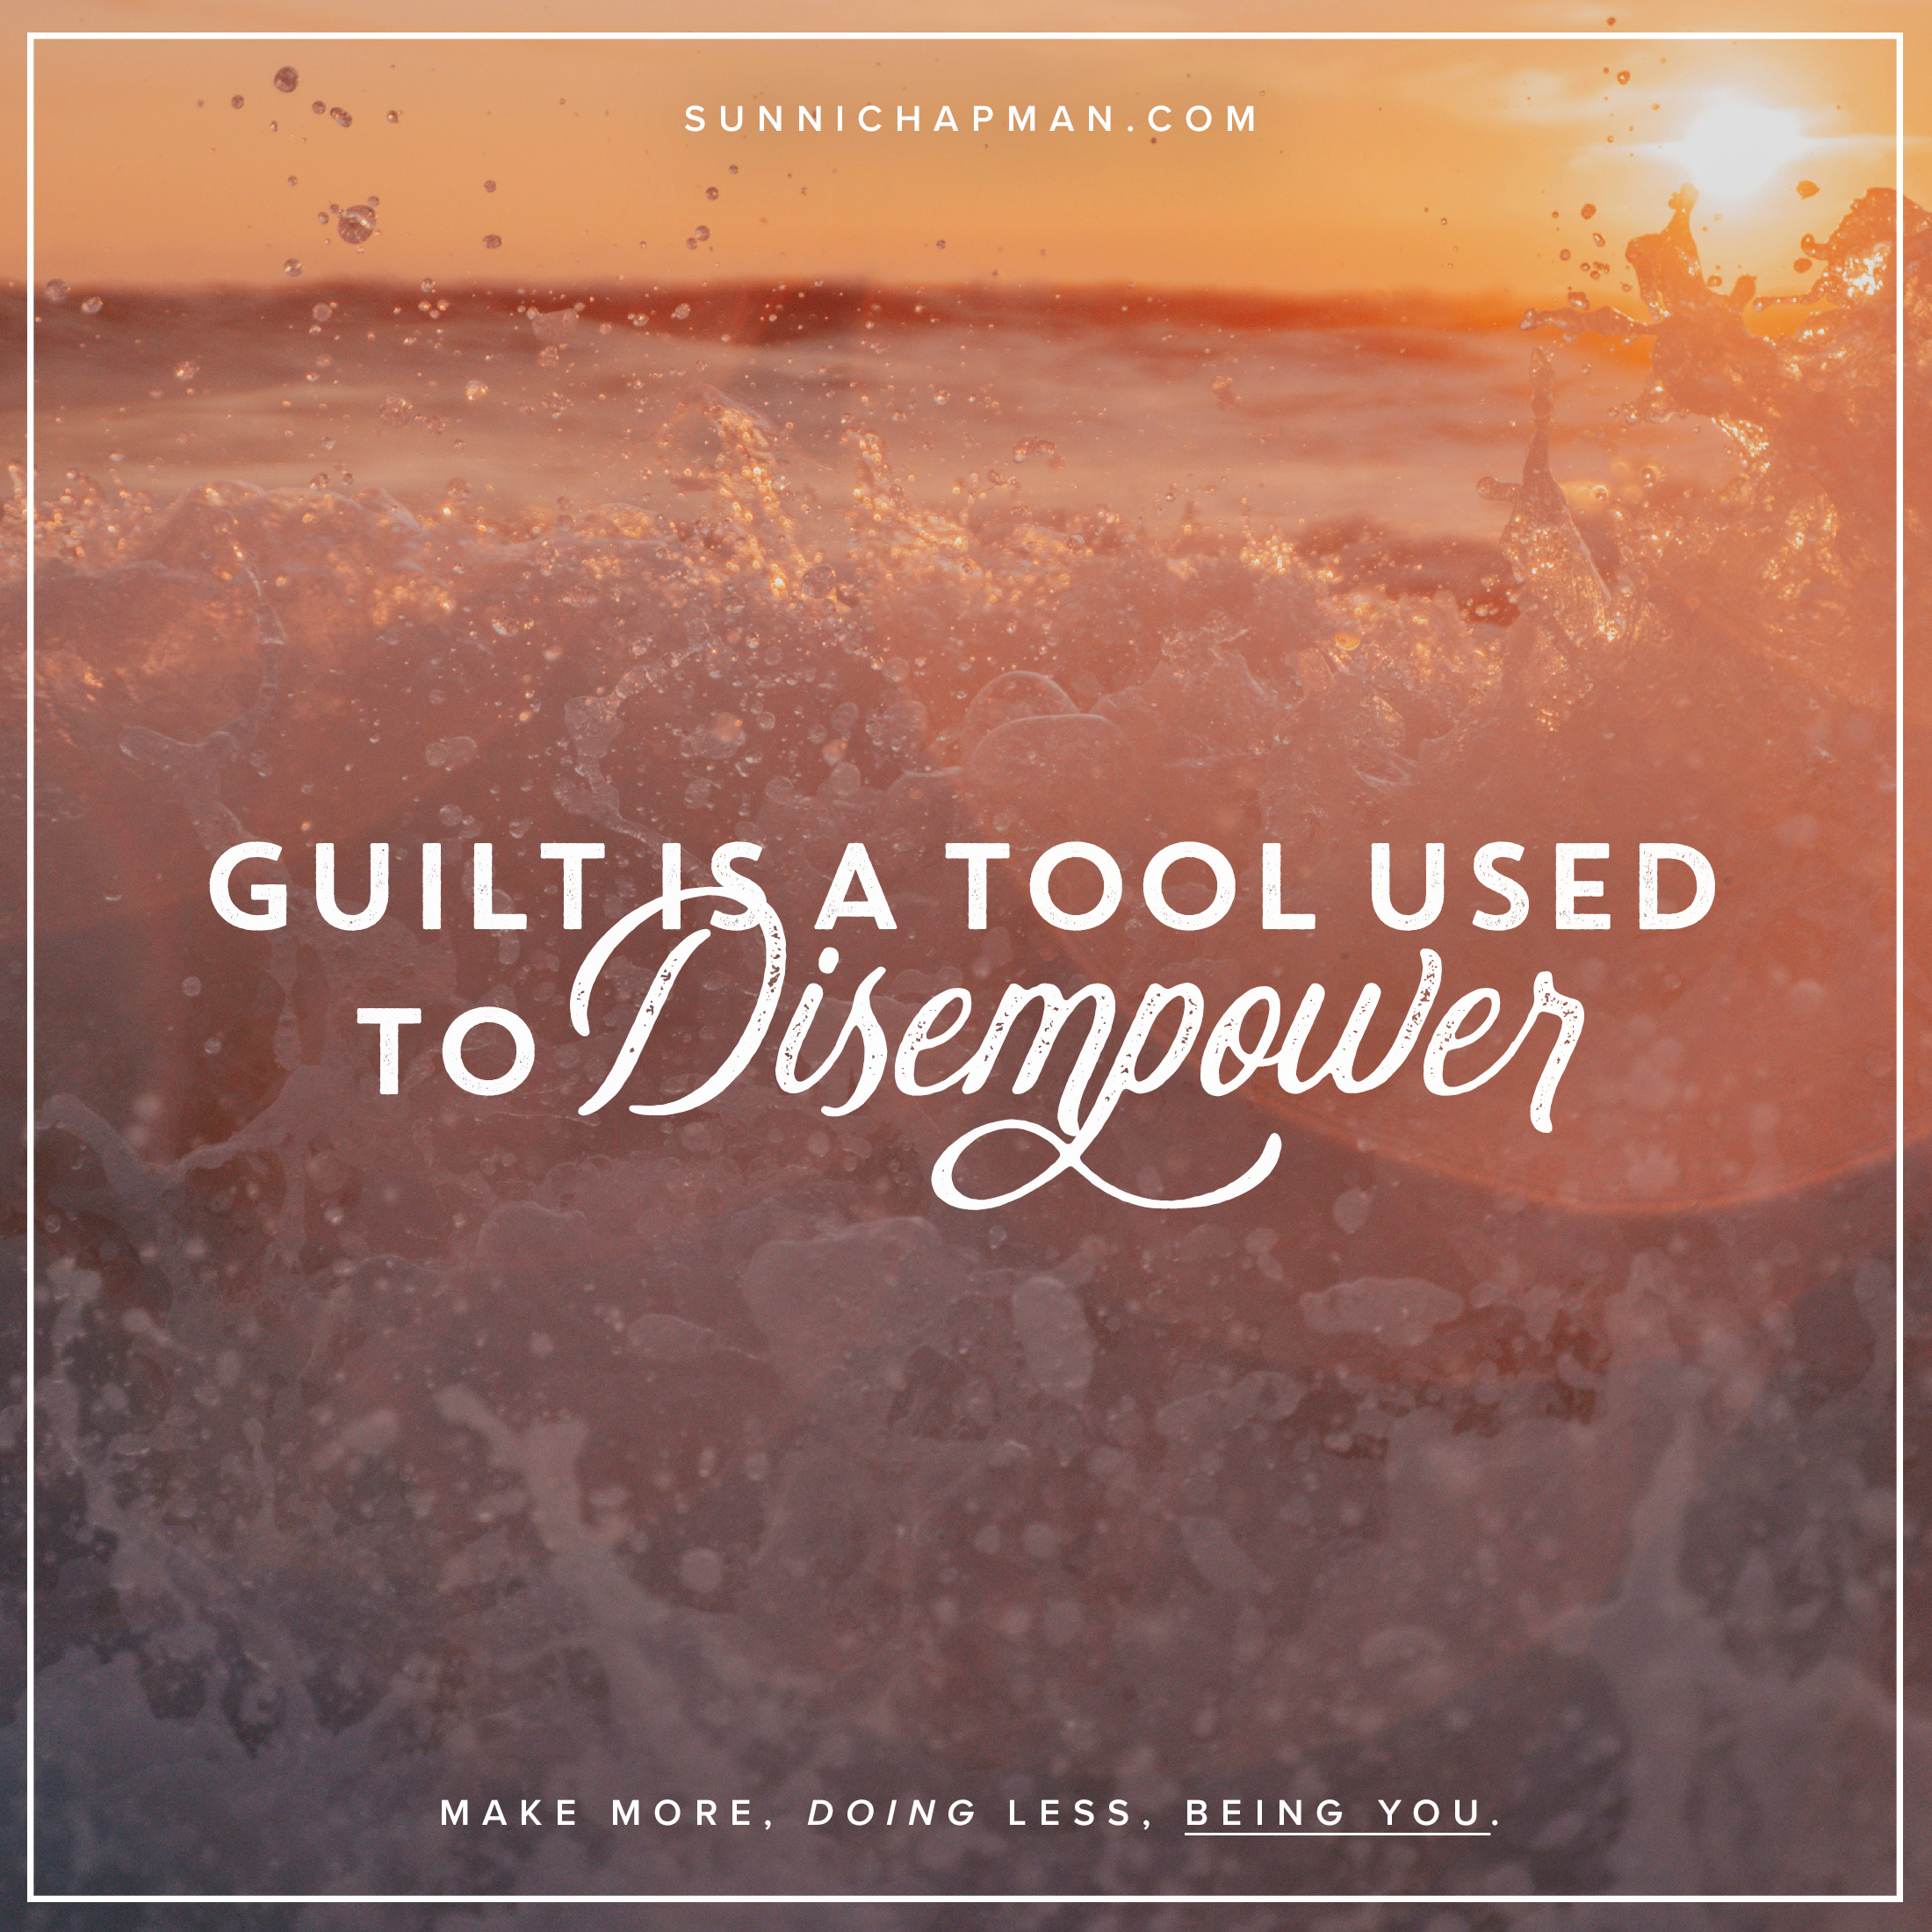 The image contains a motivational quote with a background of an ocean sunset. The text on the image reads:

"SUNNICHAPMAN.COM

GUILT IS A TOOL USED TO DISEMPOWER

MAKE MORE, DOING LESS, BEING YOU."